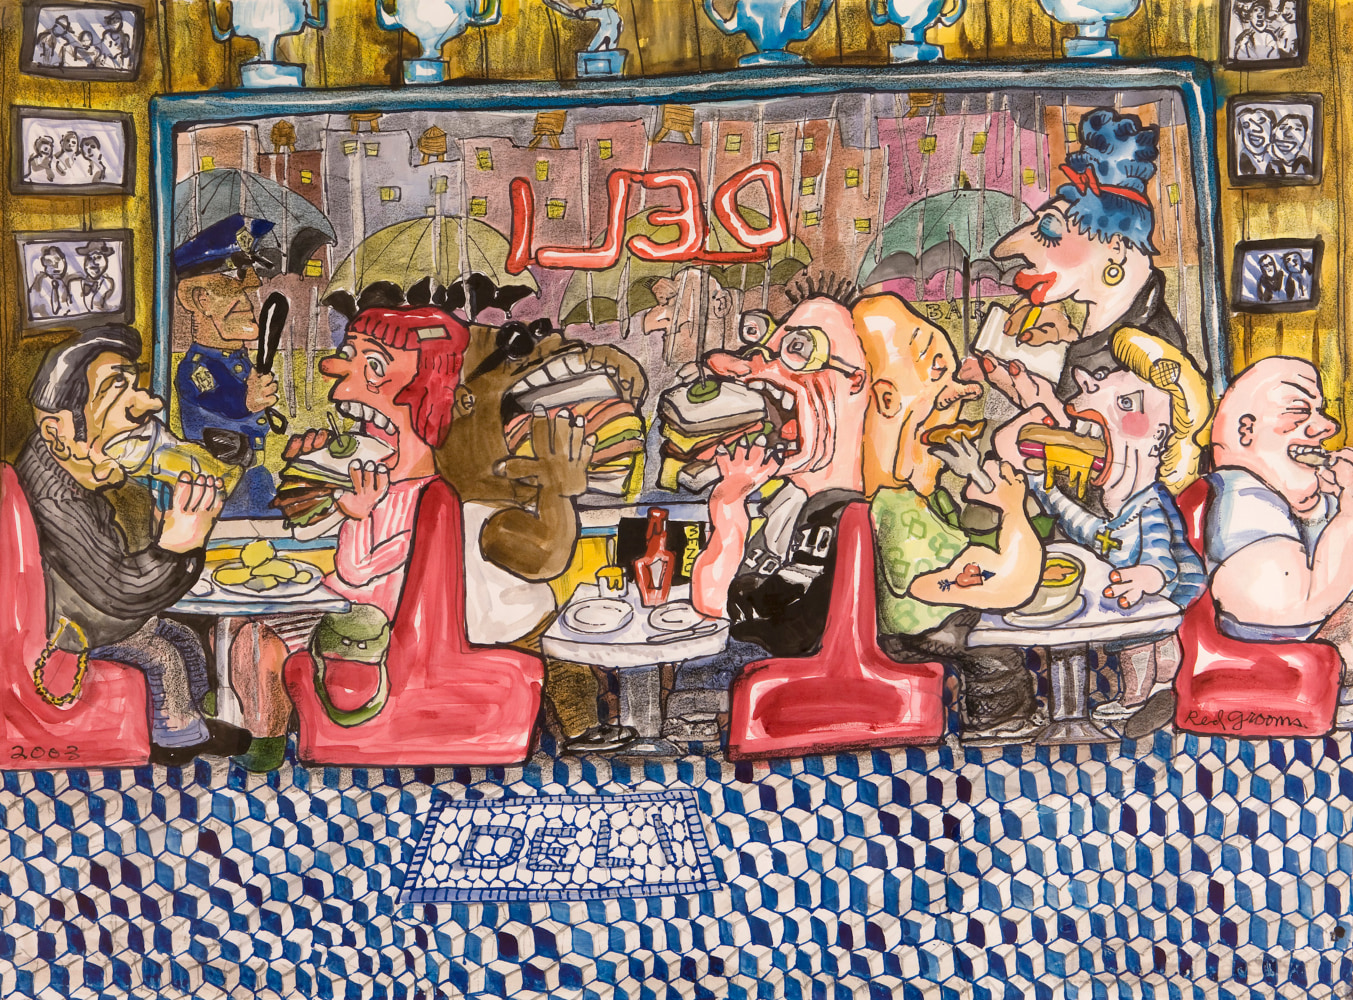 An artwork by Red Grooms depicting exaggerated depictions of customers eating sandwiches at a deli.